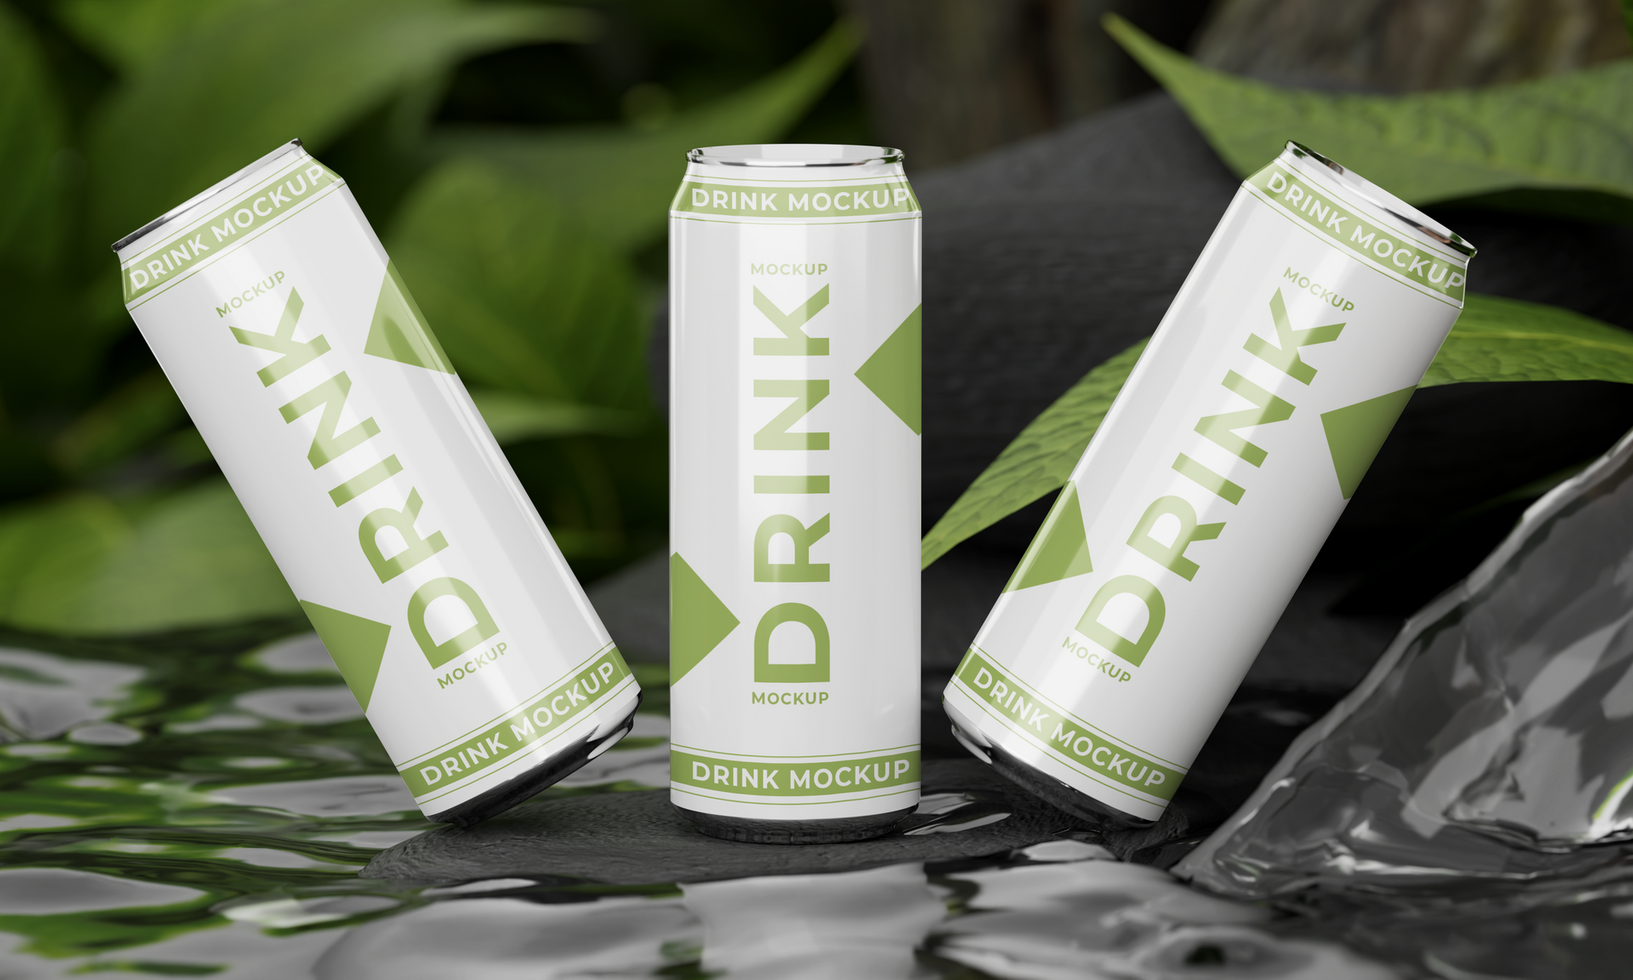 Branding can drink mockup nature style psd